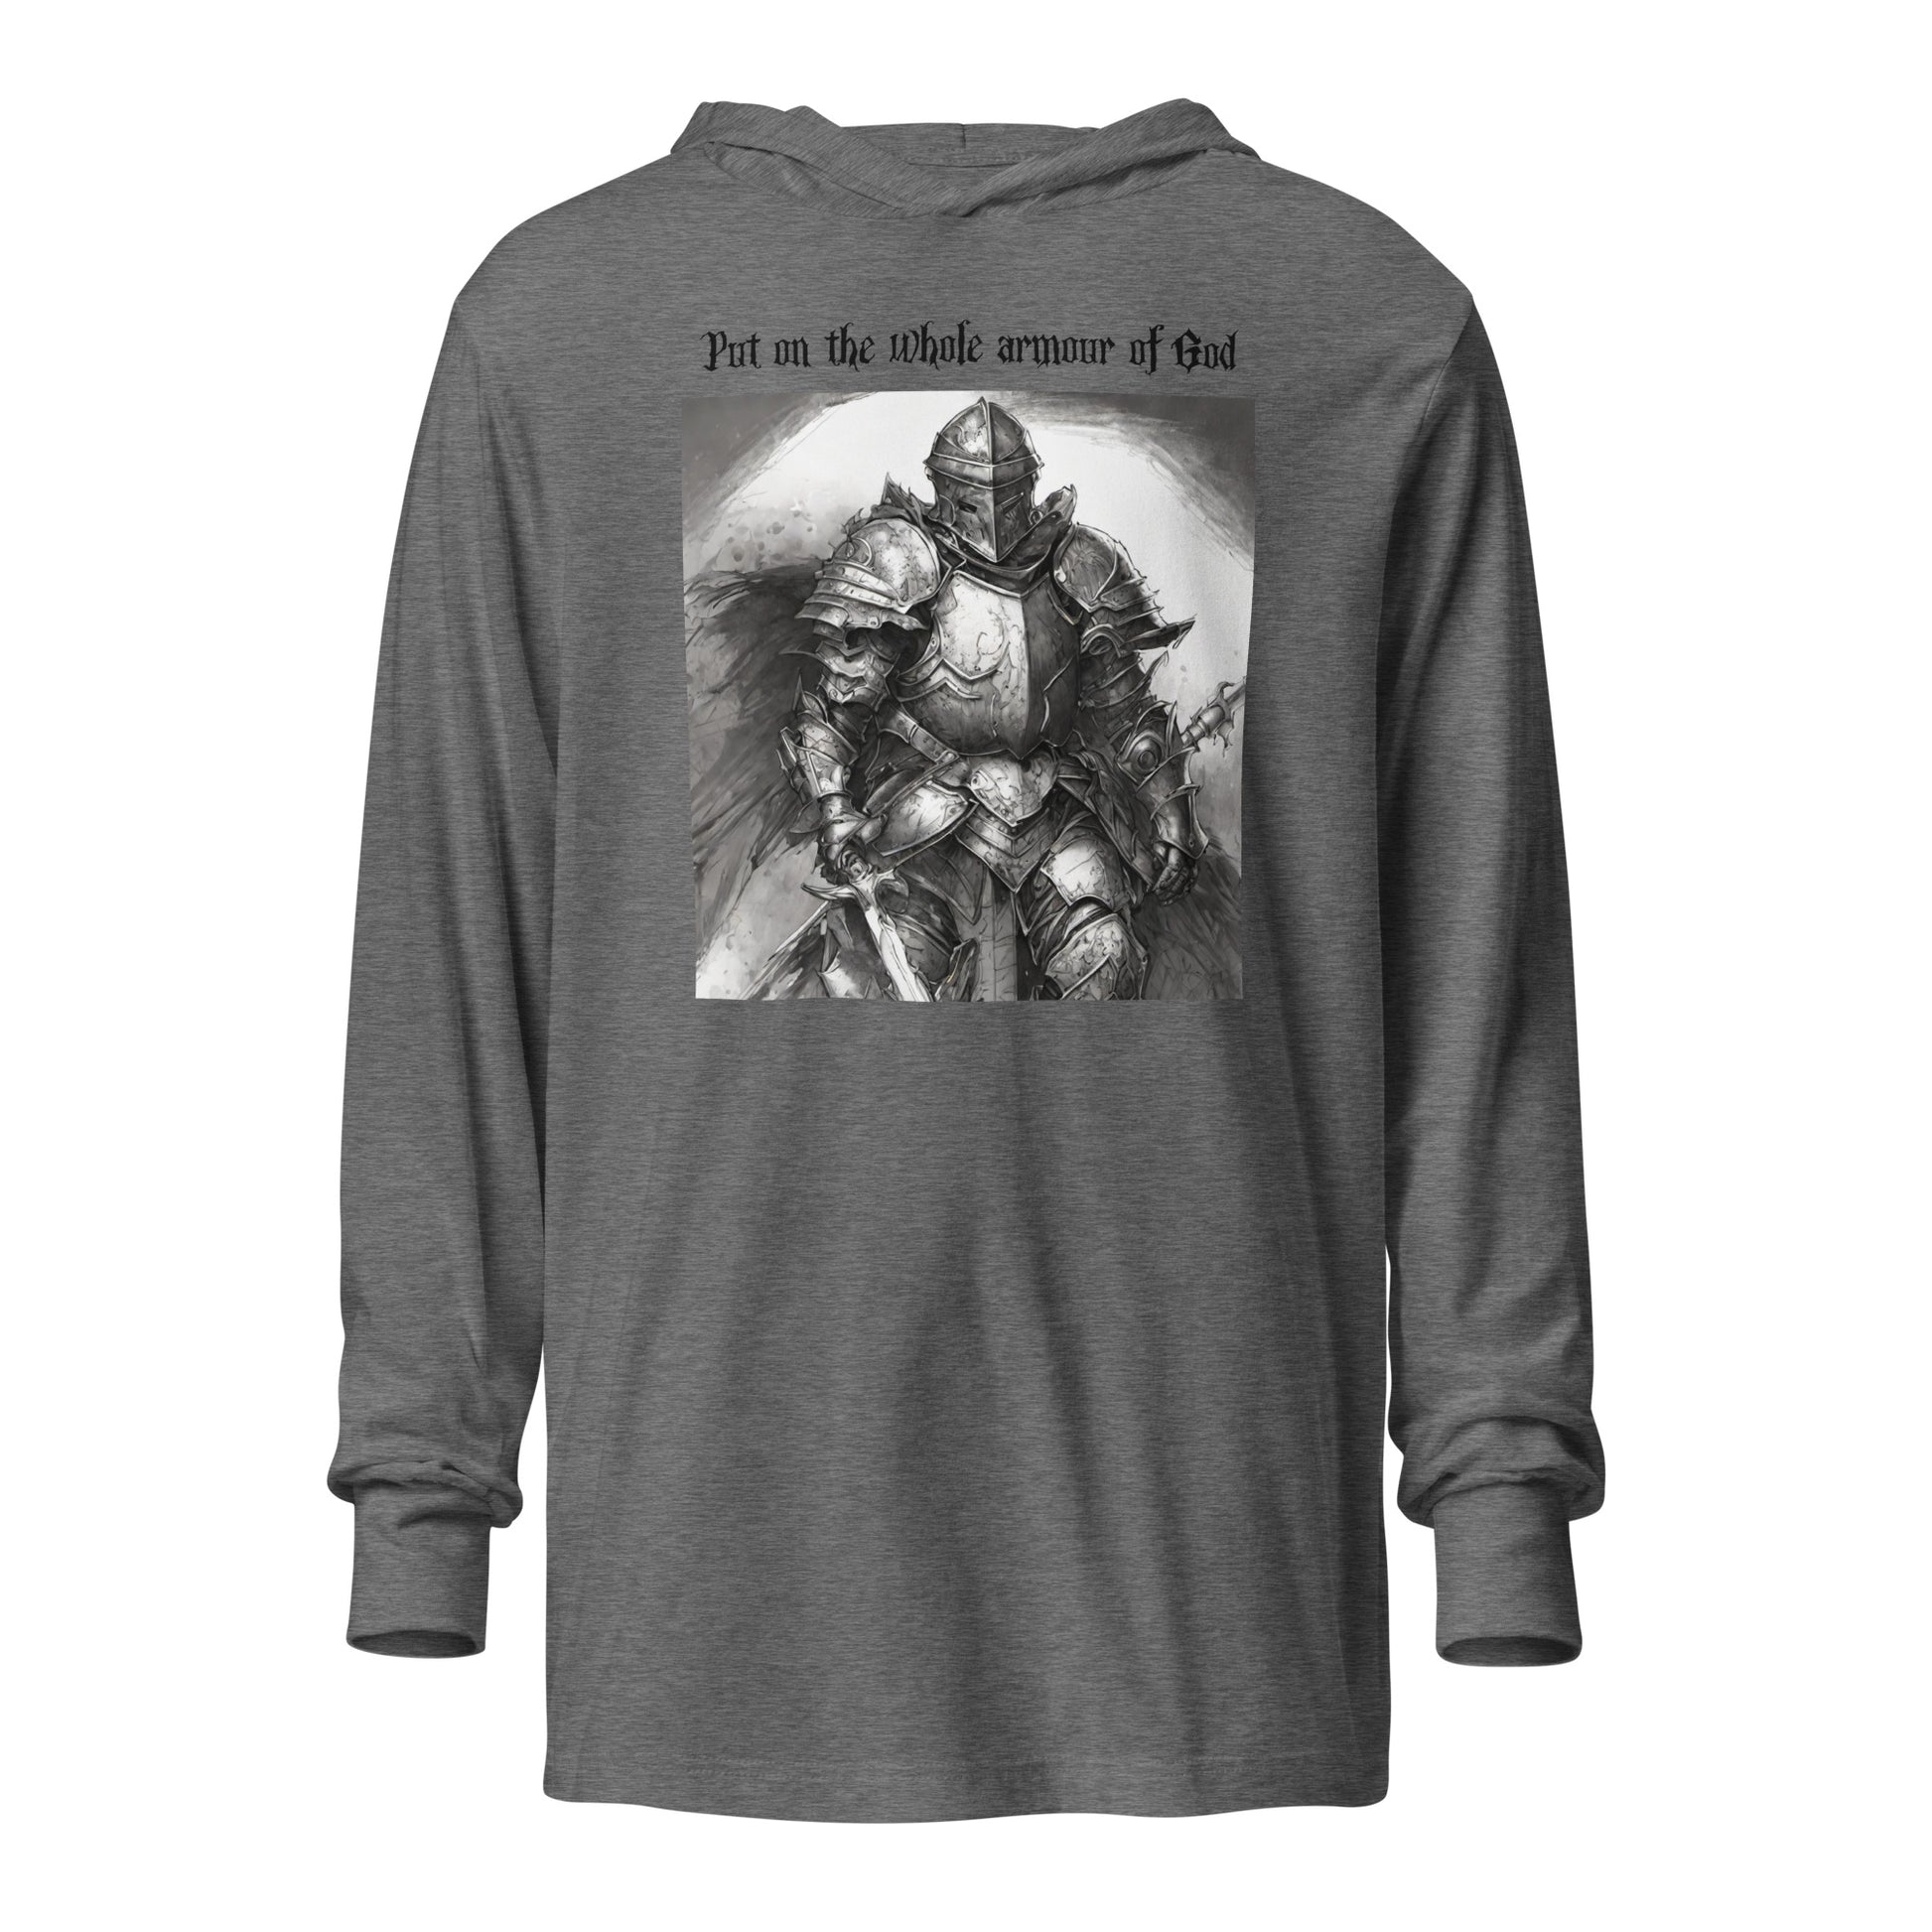 Put on the Armor of God Christian Men's Hooded Long-Sleeve Tee Grey Triblend